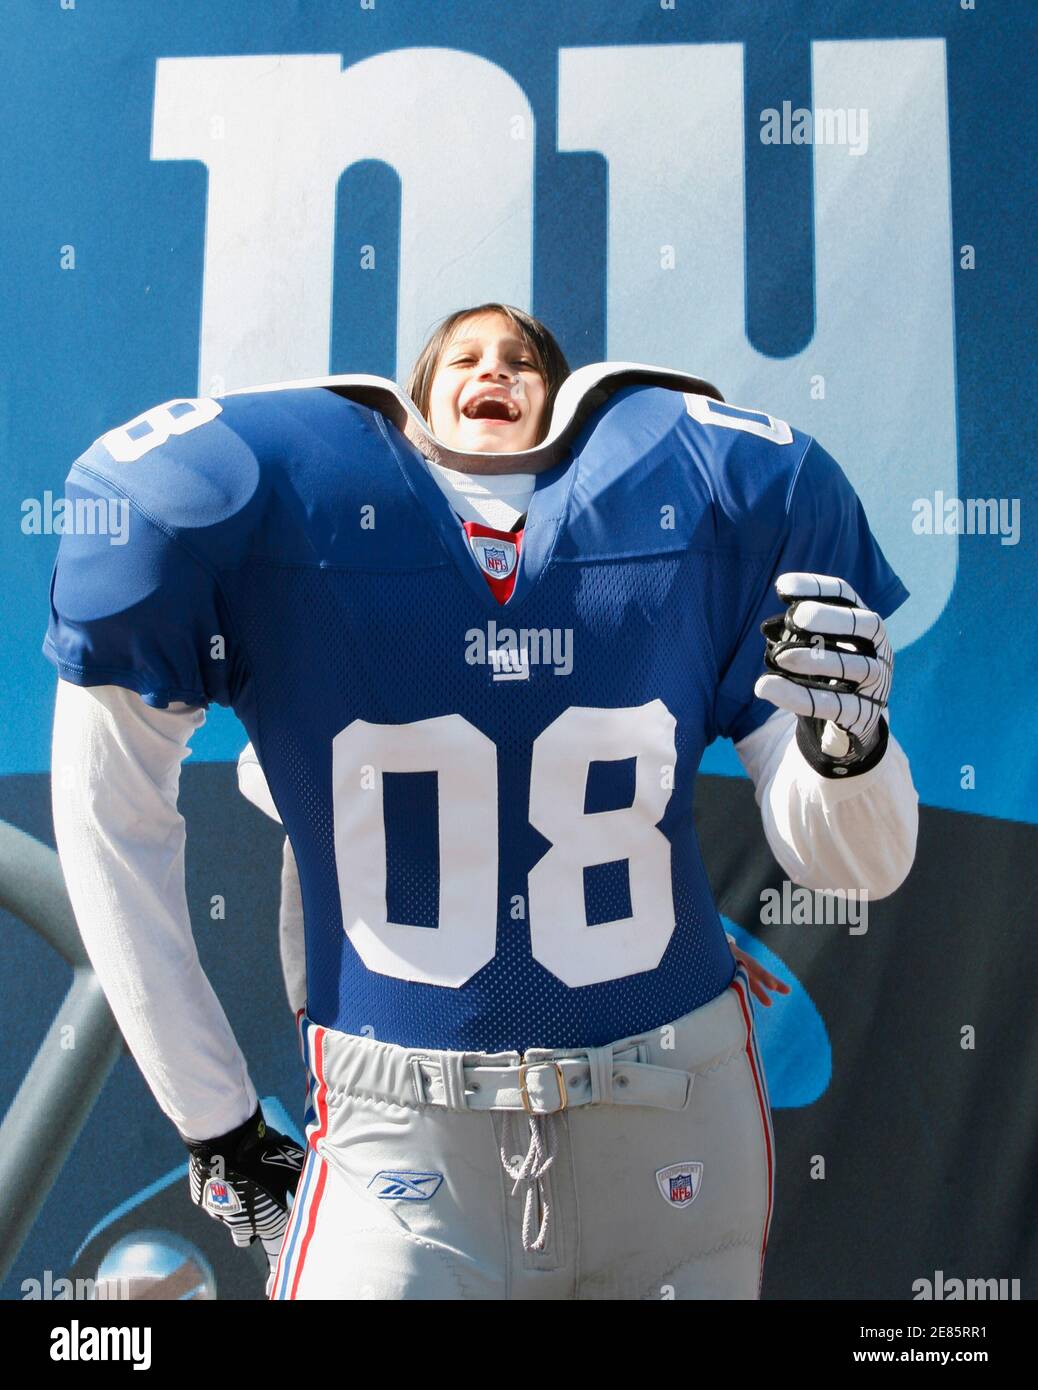 Glenda Ware, 9, poses in the suit of a New York Giants football player at the NFL Experience in Glendale, Arizona, January 30, 2008.       REUTERS/Rick Wilking    (UNITED STATES) Stock Photo